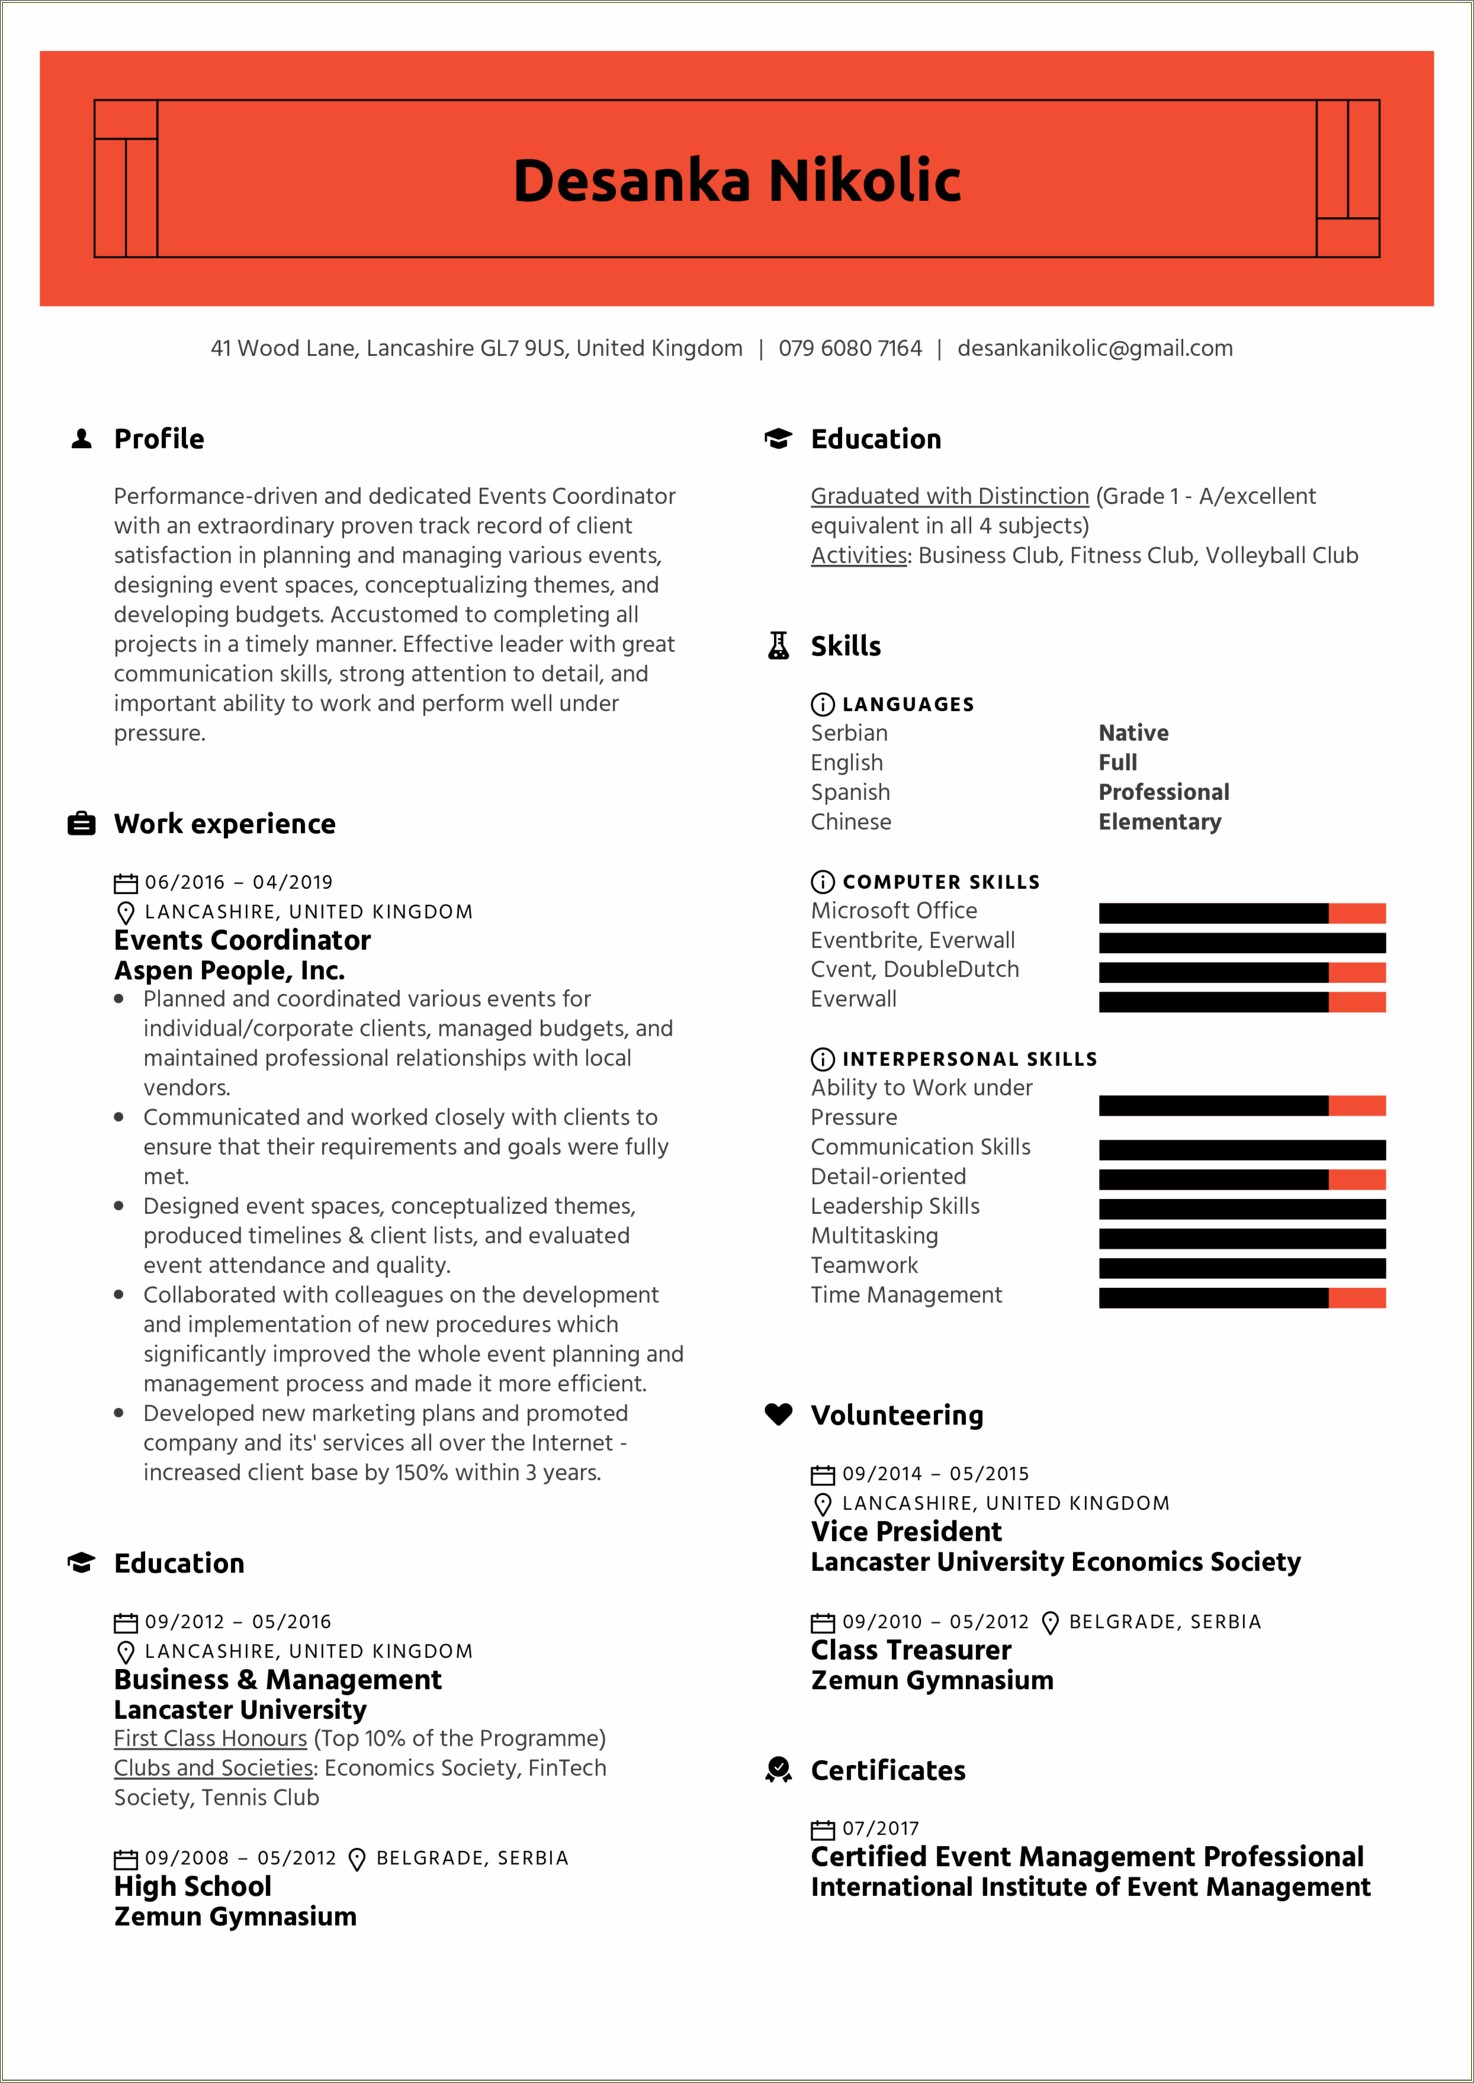 Example Resume For Event Manager